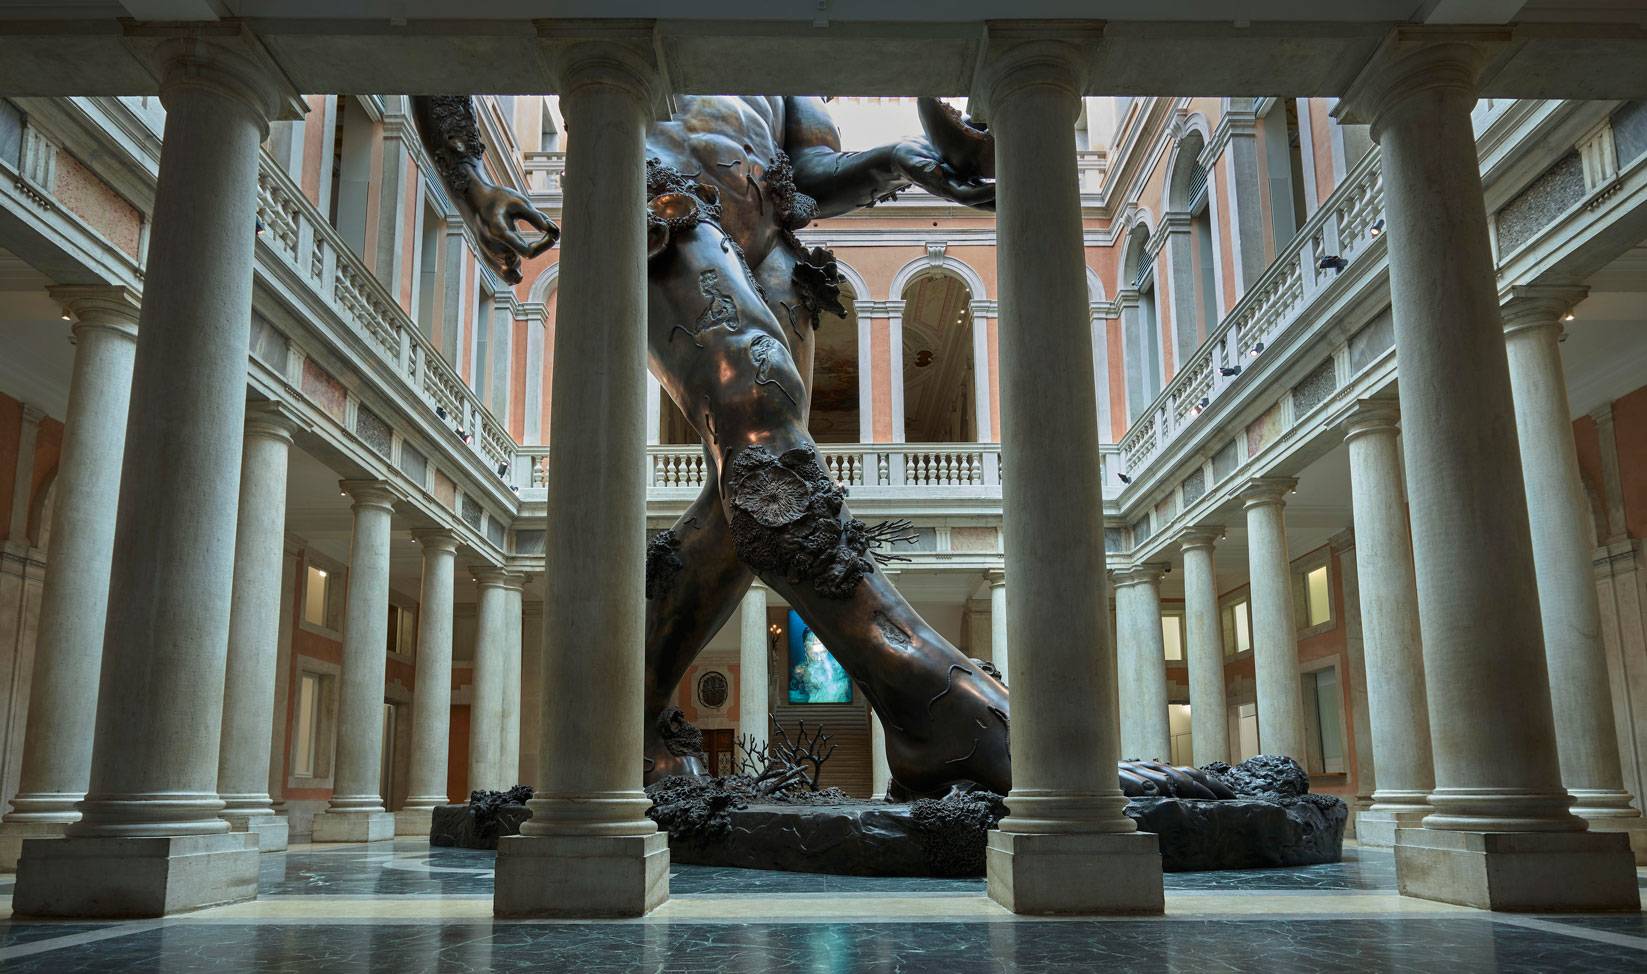 Atrium:
Damien Hirst, Demon with Bowl (Exhibition Enlargement). Photographed by Prudence Cuming
Associates © Damien Hirst and Science Ltd. All rights reserved, DACS/SIAE 2017